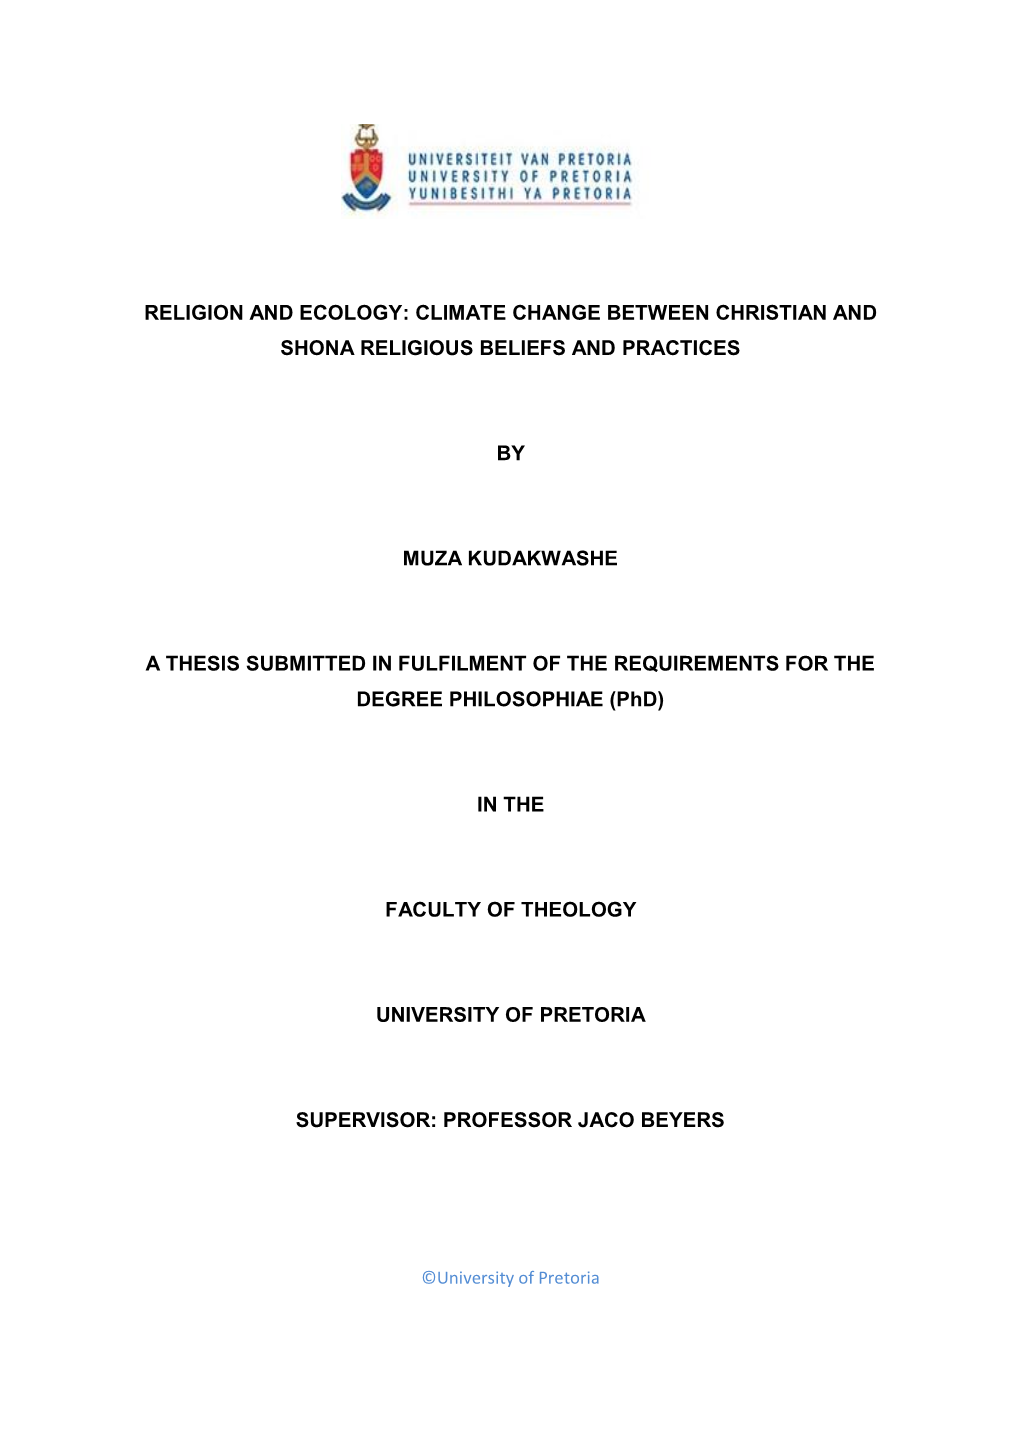 Religion and Ecology: Climate Change Between Christian and Shona Religious Beliefs and Practices by Muza Kudakwashe a Thesis